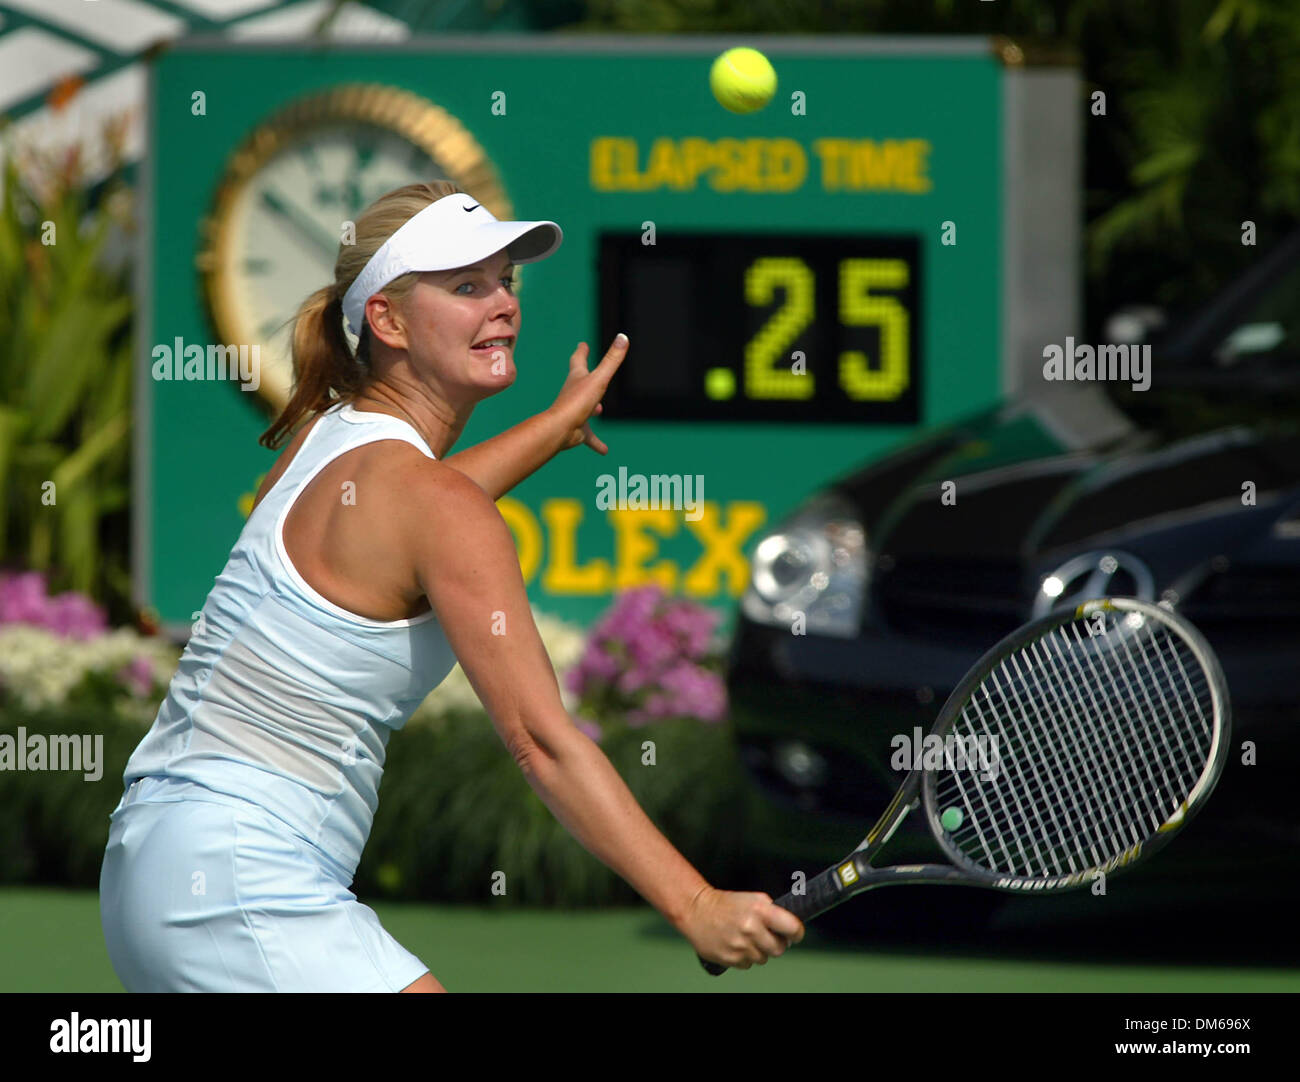 Dec 04, 2004; Palm Beach, FL, USA; Action at the Chris Evert/Bank of  America Pro-Celebriy Tennis Classic, Saturday at the Delray Beach Tennis  Center. Here MAEVE QUINLAN returns a shot during her